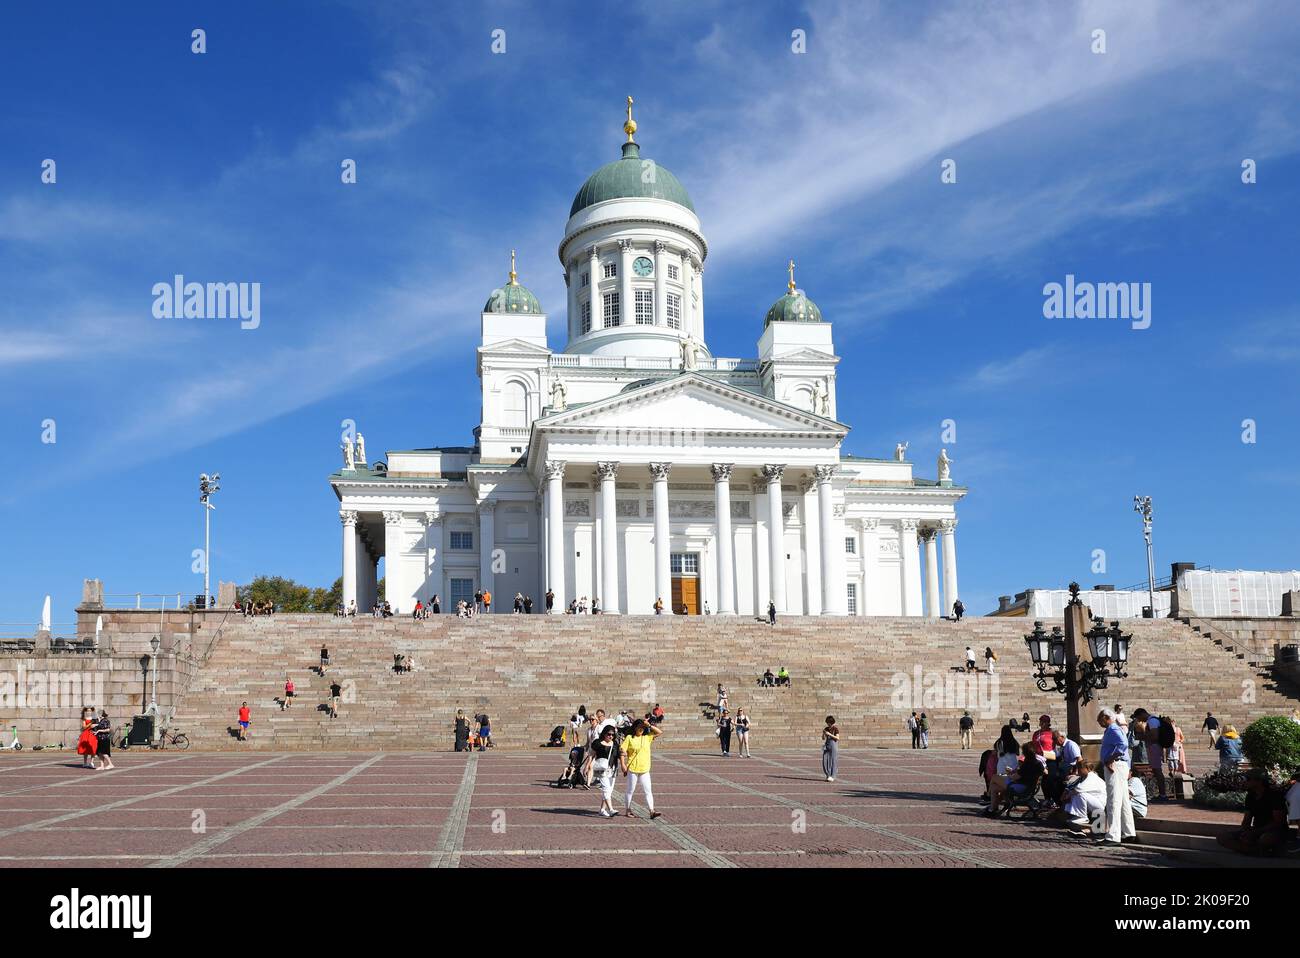 Helsinki, Finland - August 20, 2022: Exterior view of the Helsinki Cathedral built in the neoclassical  style. Stock Photo